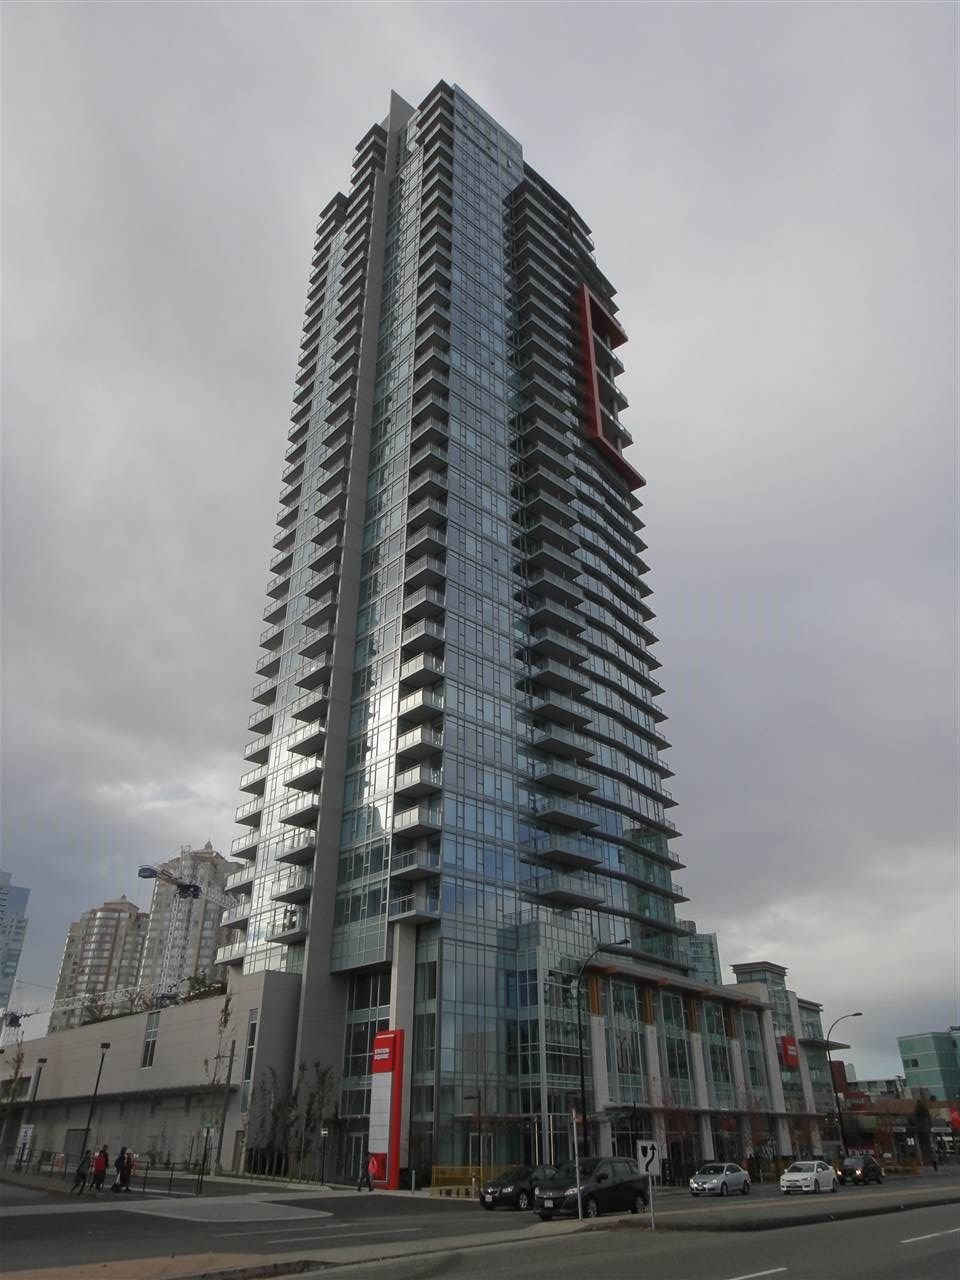 Main Photo: 2806 4688 KINGSWAY in Burnaby: Metrotown Condo for sale (Burnaby South)  : MLS®# R2009932